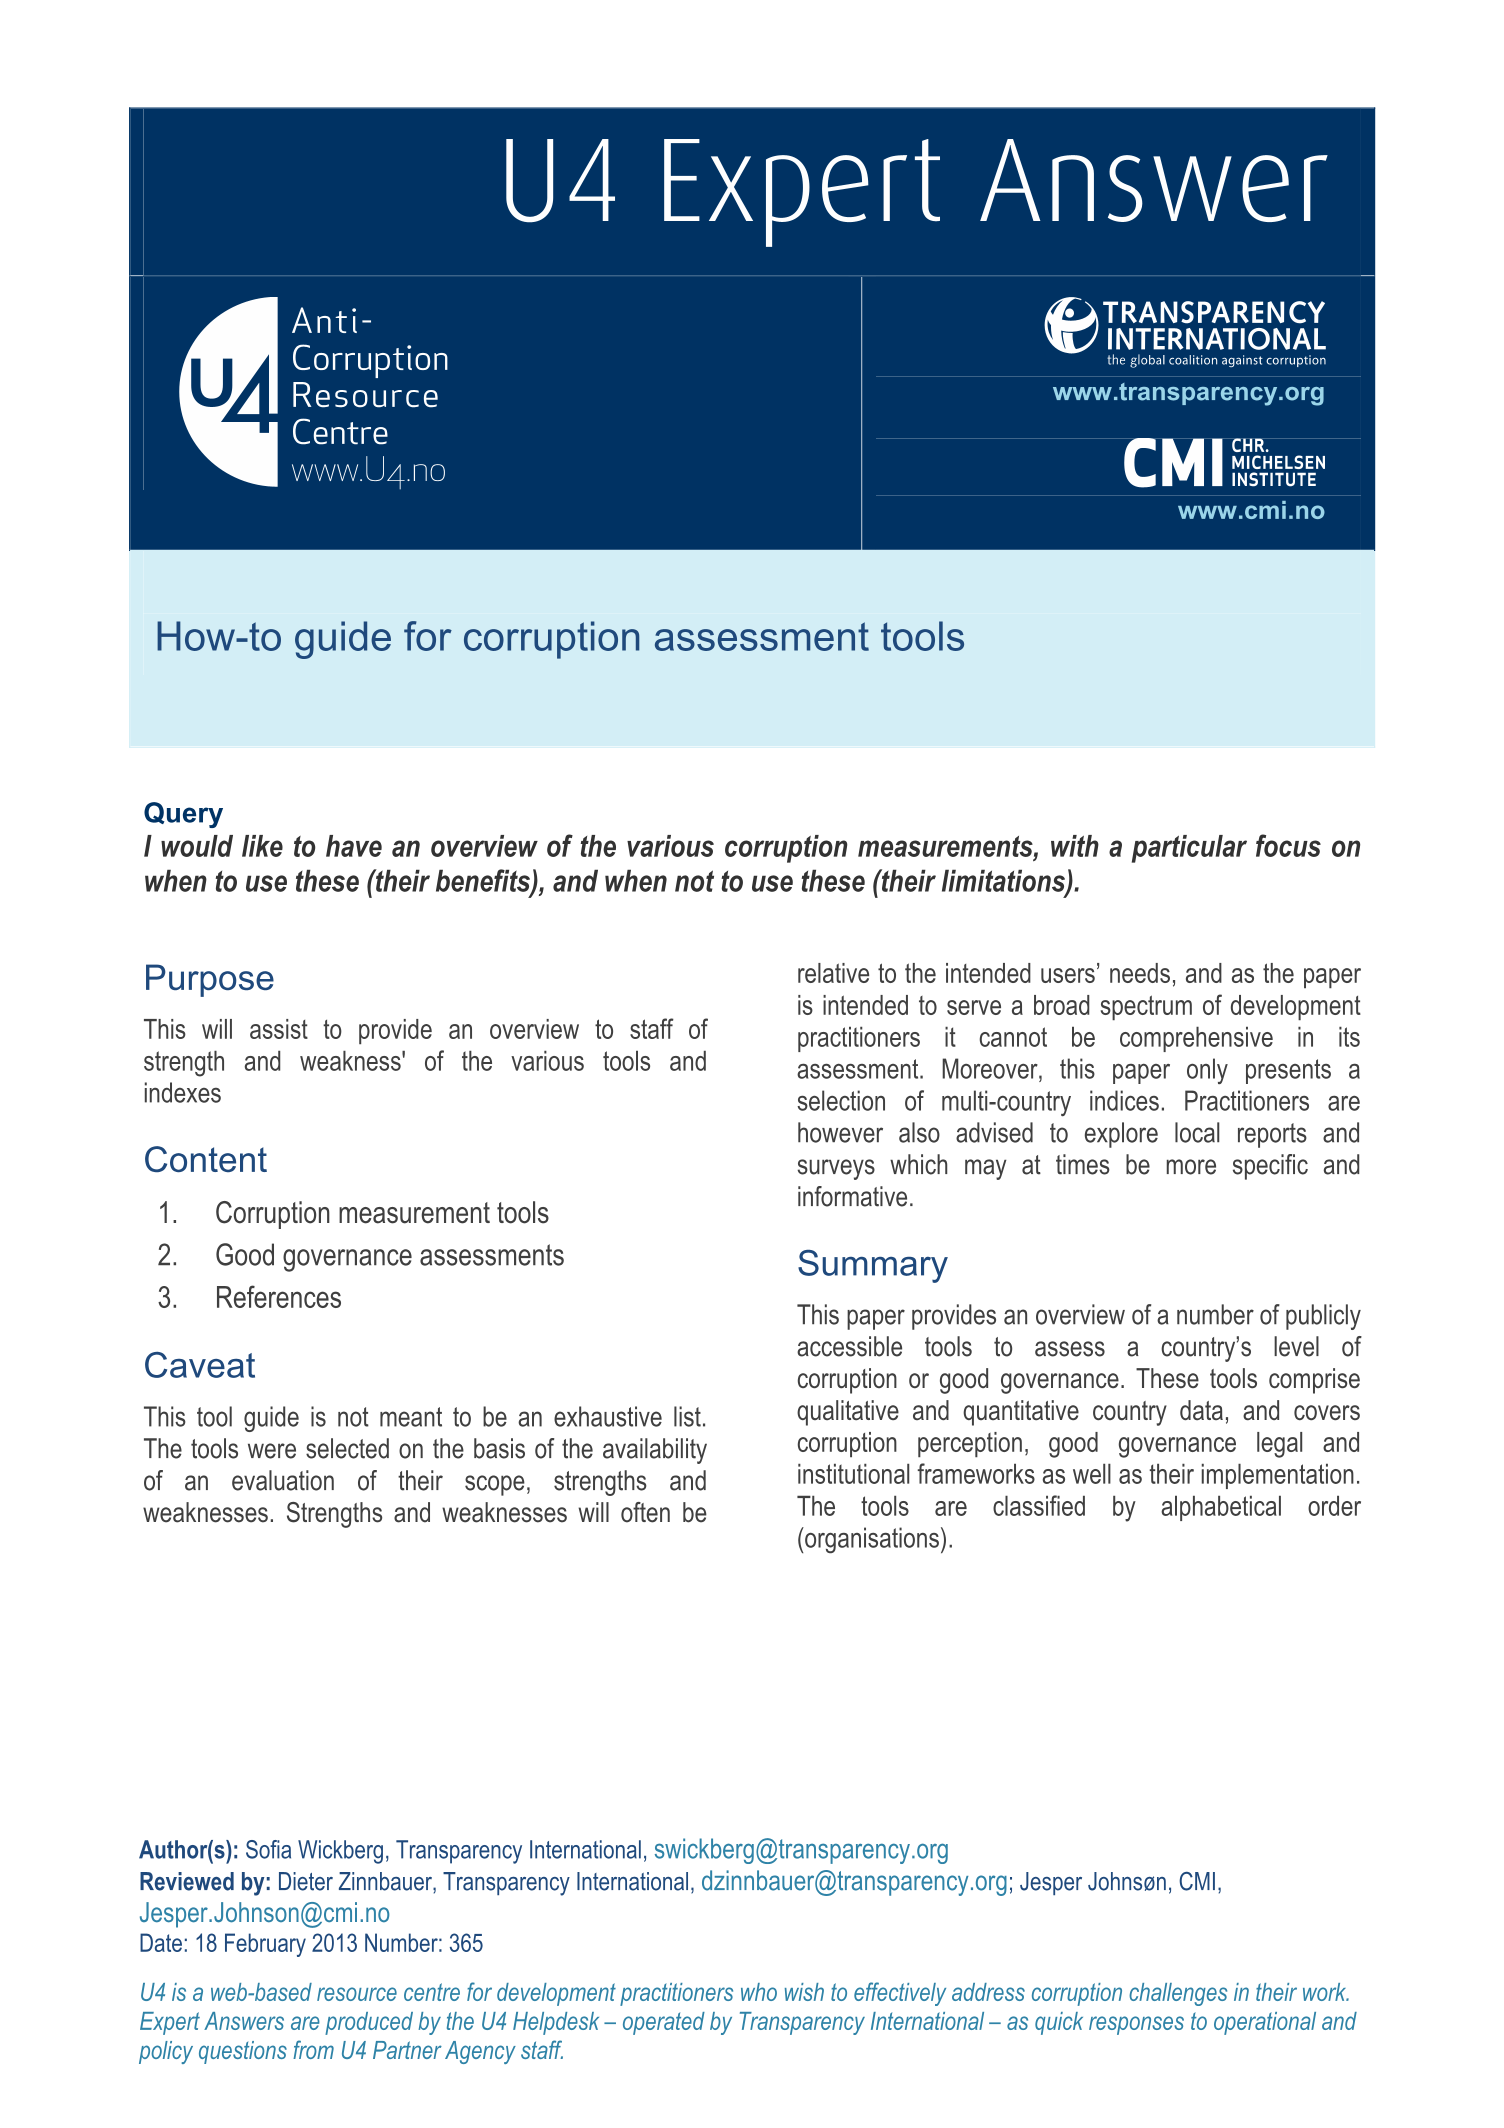 How-to guide for corruption assessment tools